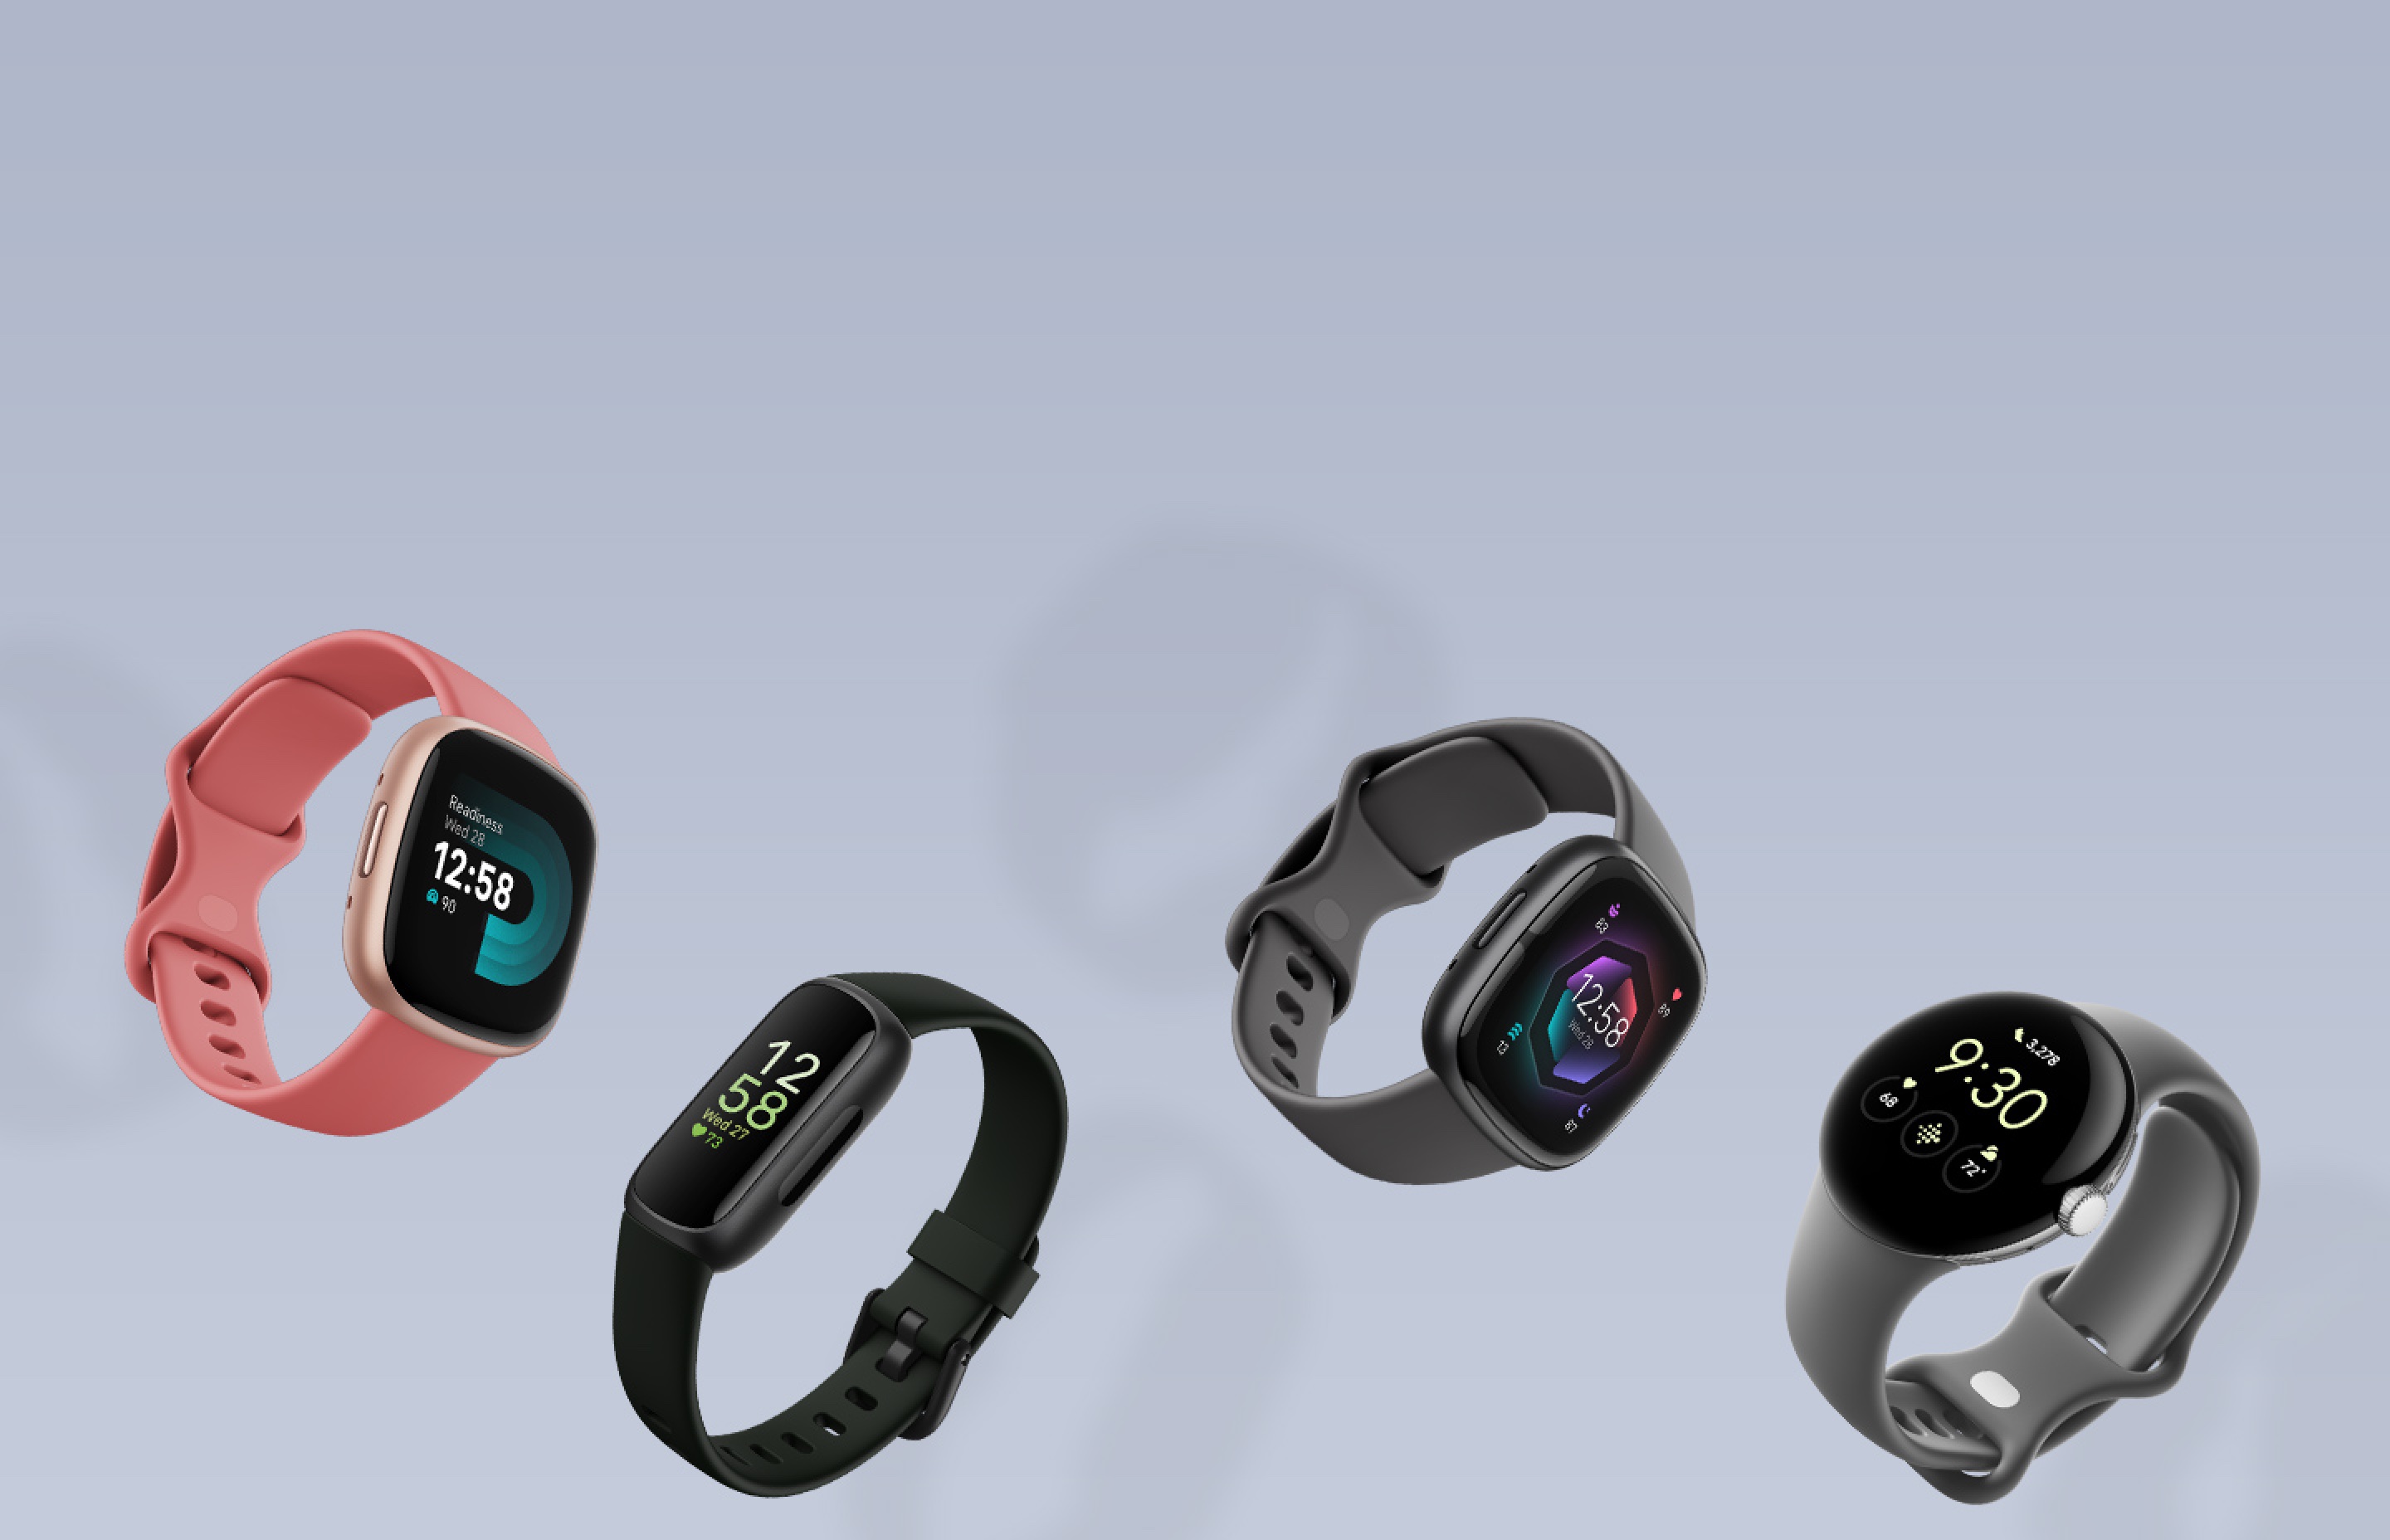 video Enkelhed Overstige Fitbit Comparison | Compare Fitness Trackers & Smartwatches